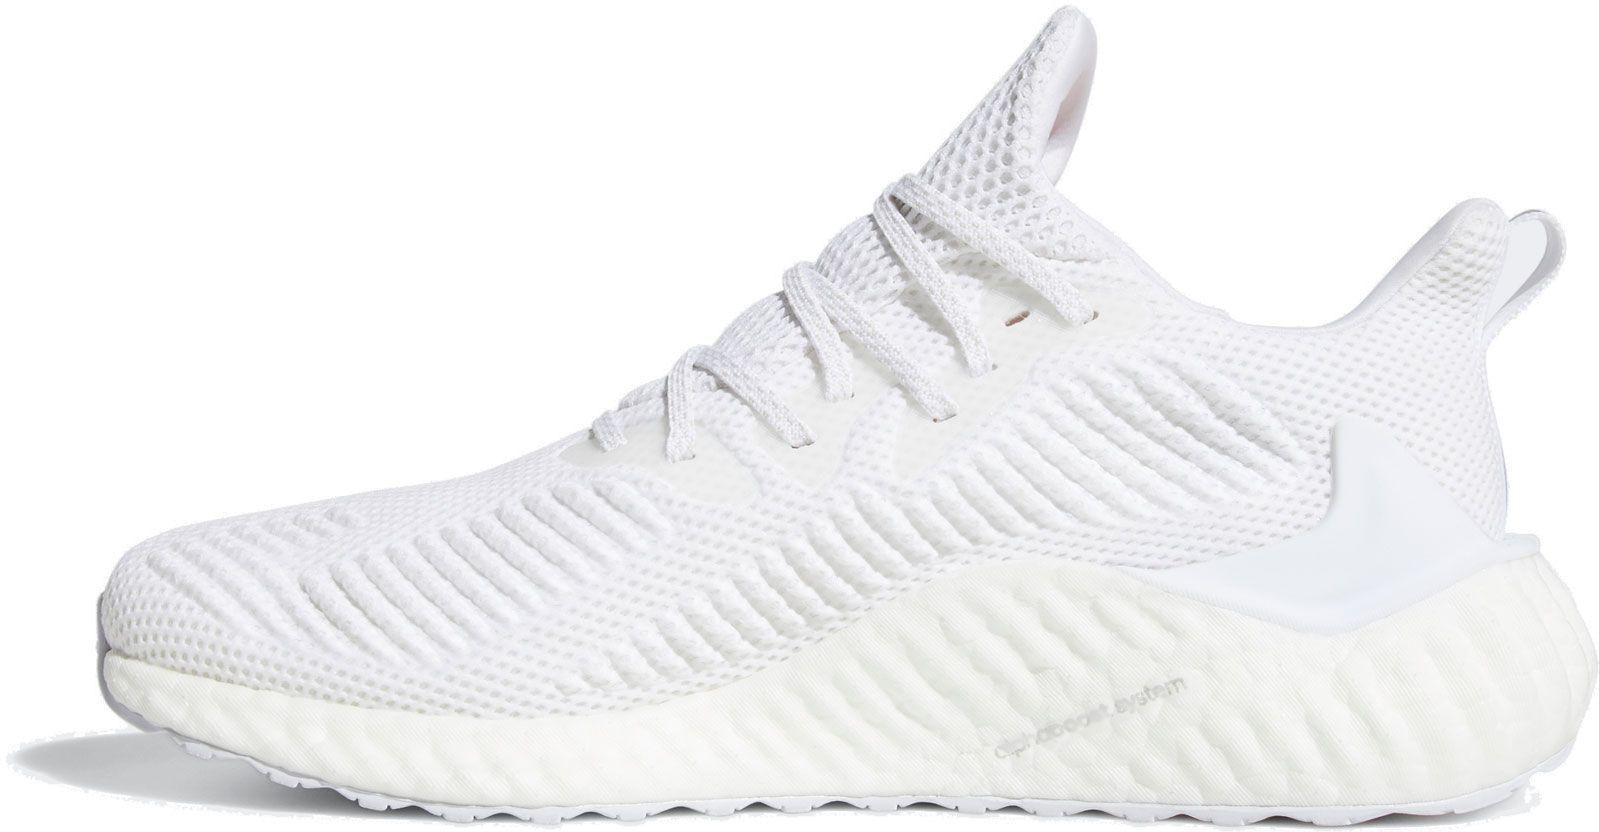 adidas Alphaboost Shoes in White/Silver 